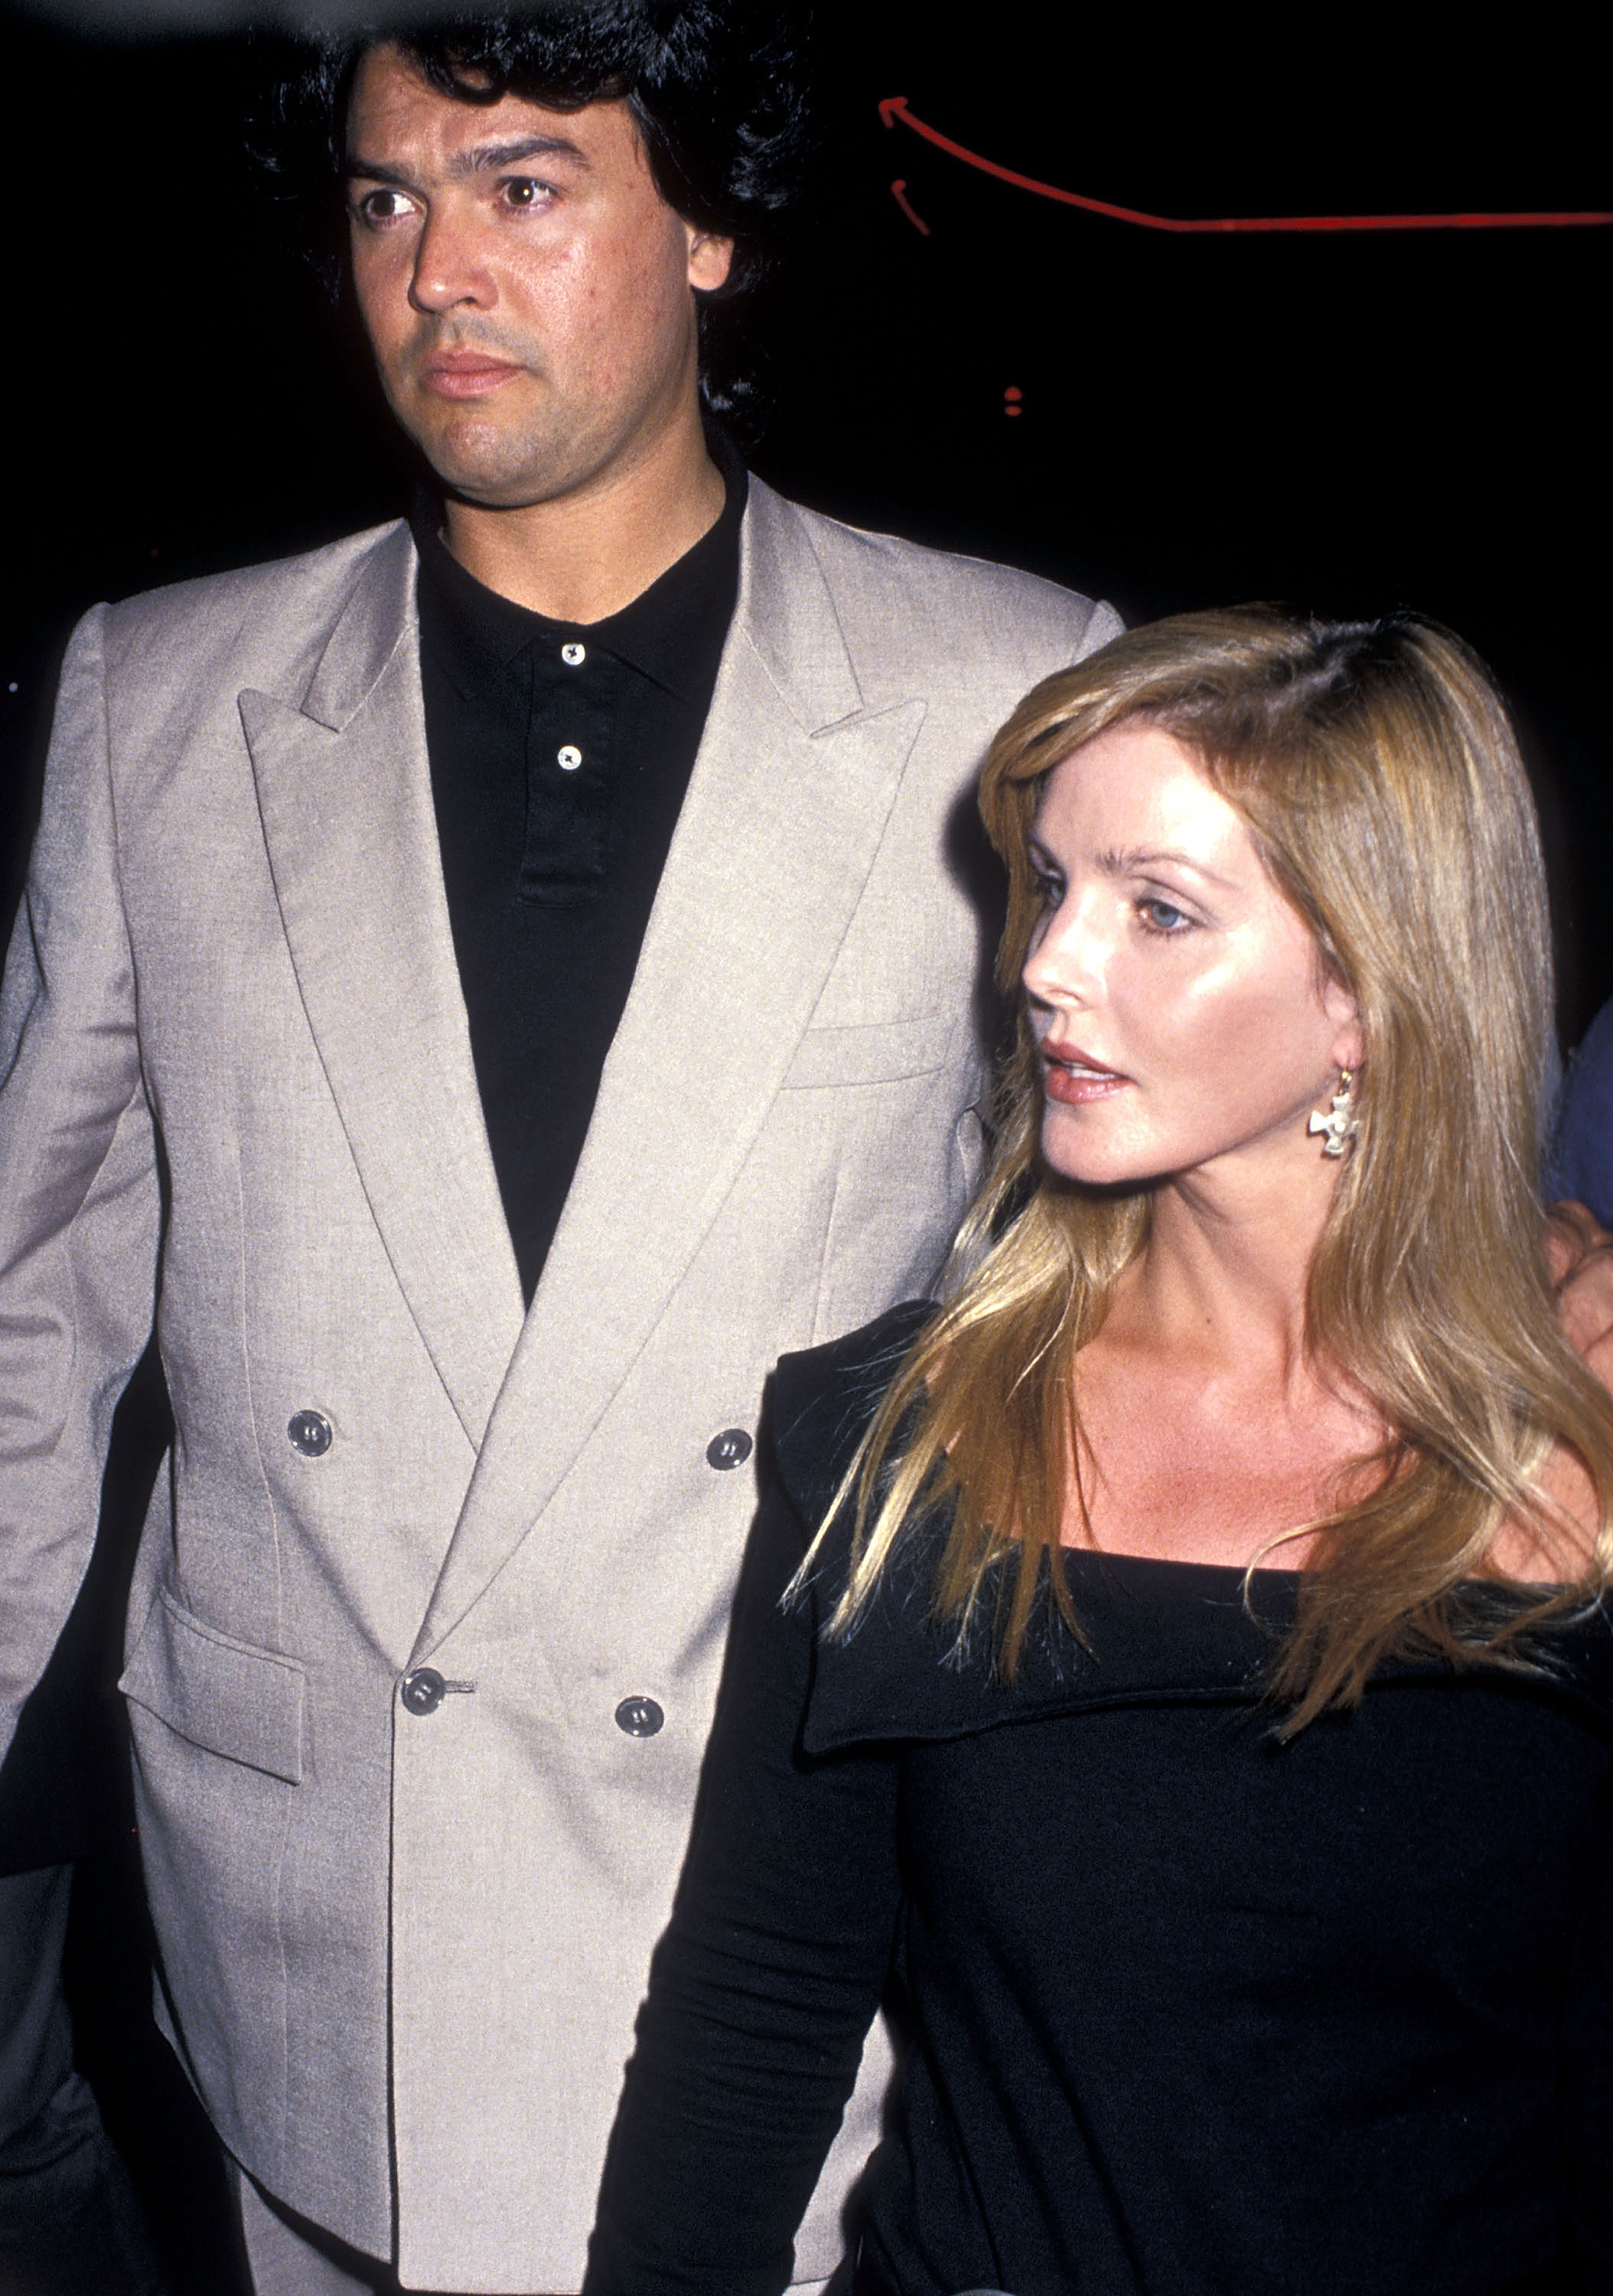 Priscilla Presley and Marco Garibaldi at the "Lethal Weapon 2" Hollywood premiere at the Mann's Chinese Theatre on July 5, 1989. | Source: Getty Images